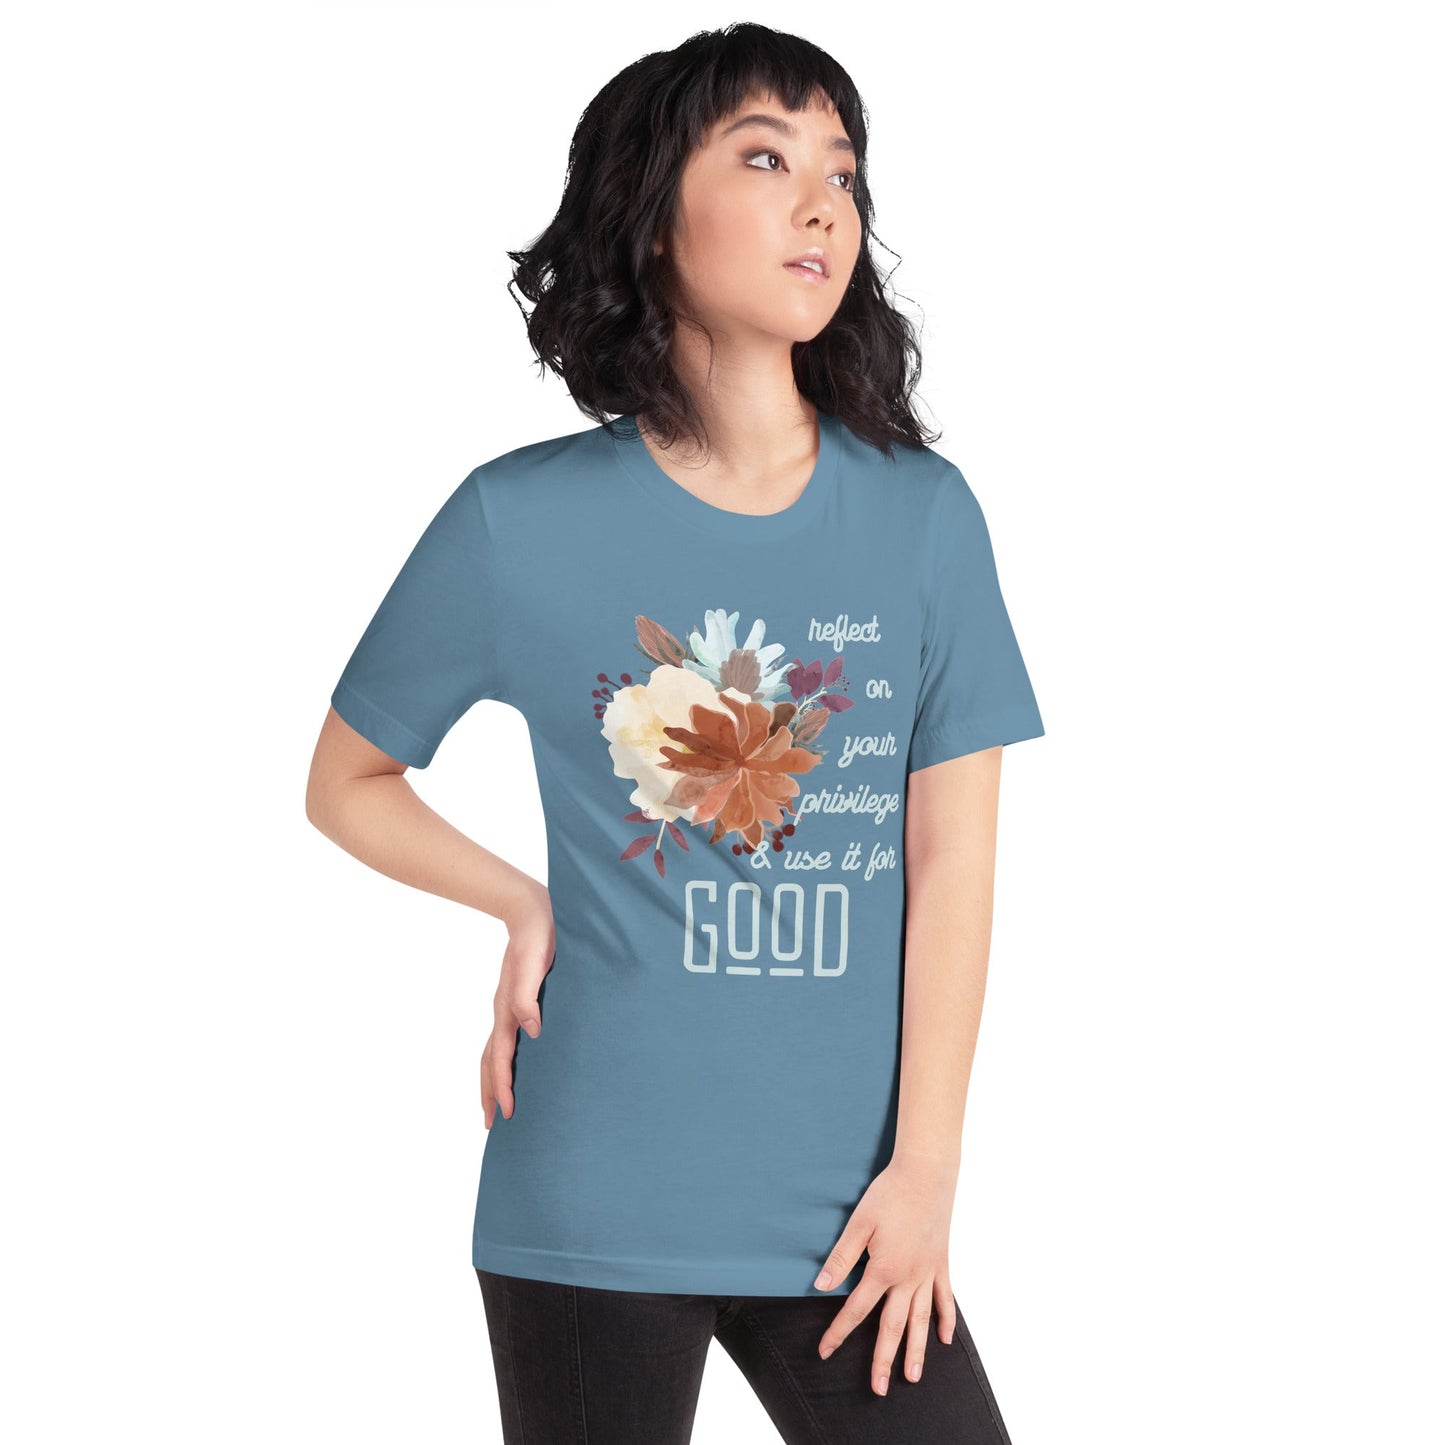 Use Your Privilege for Good Floral Unisex t-shirt-recalciGrant